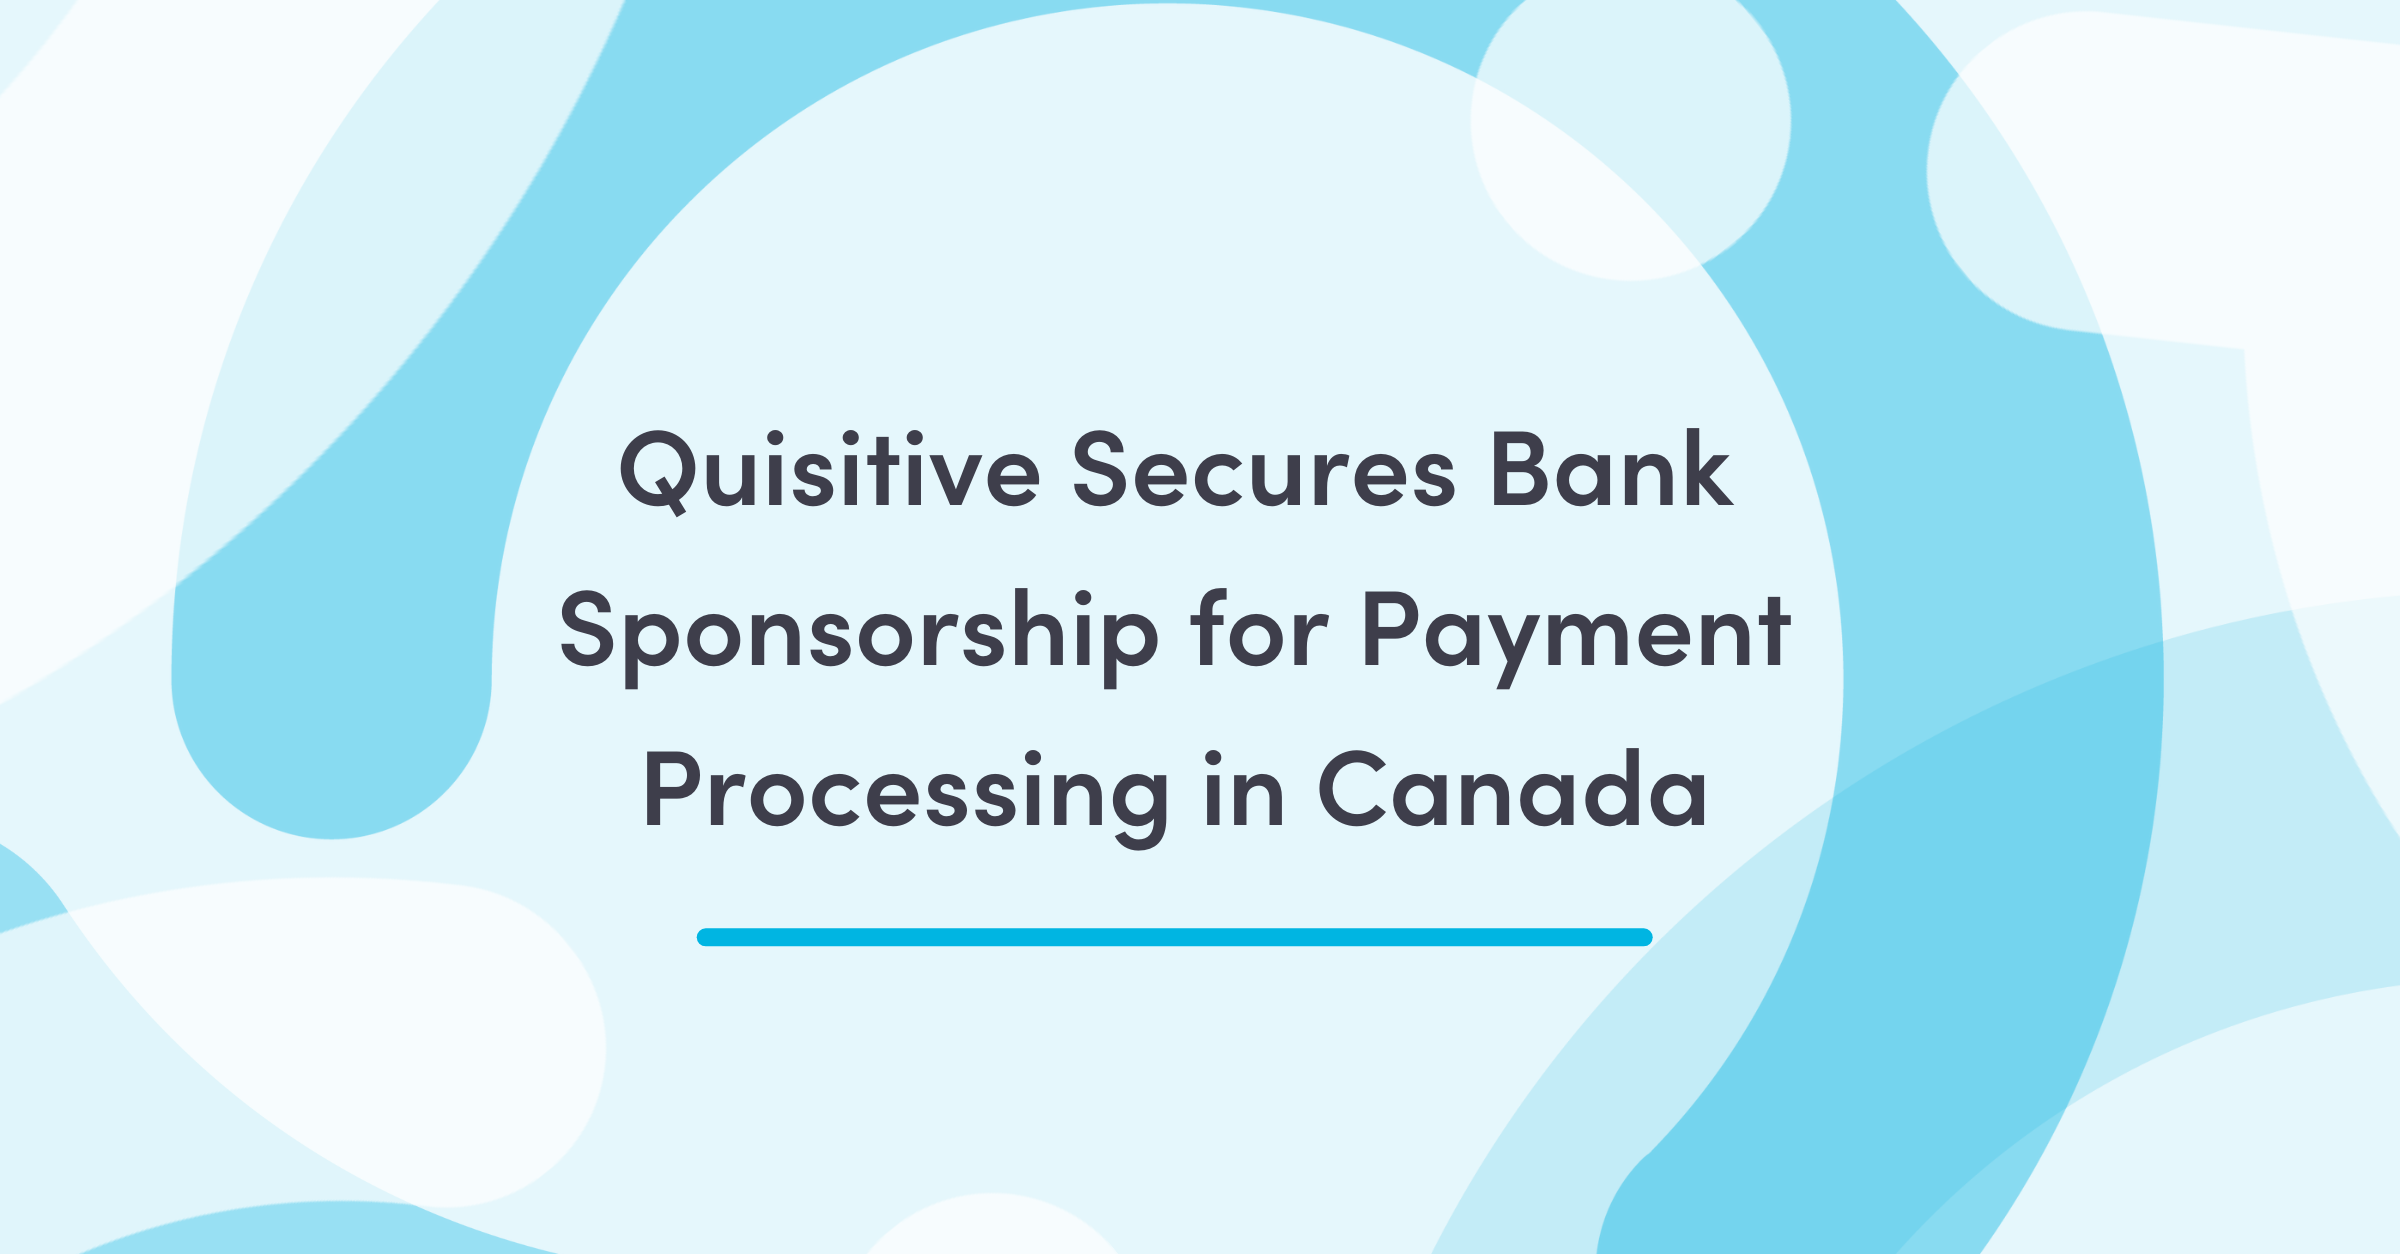 News Article Feature Image: Reads "Quisitive Secures Bank Sponsorship for Payment Processing in Canada"